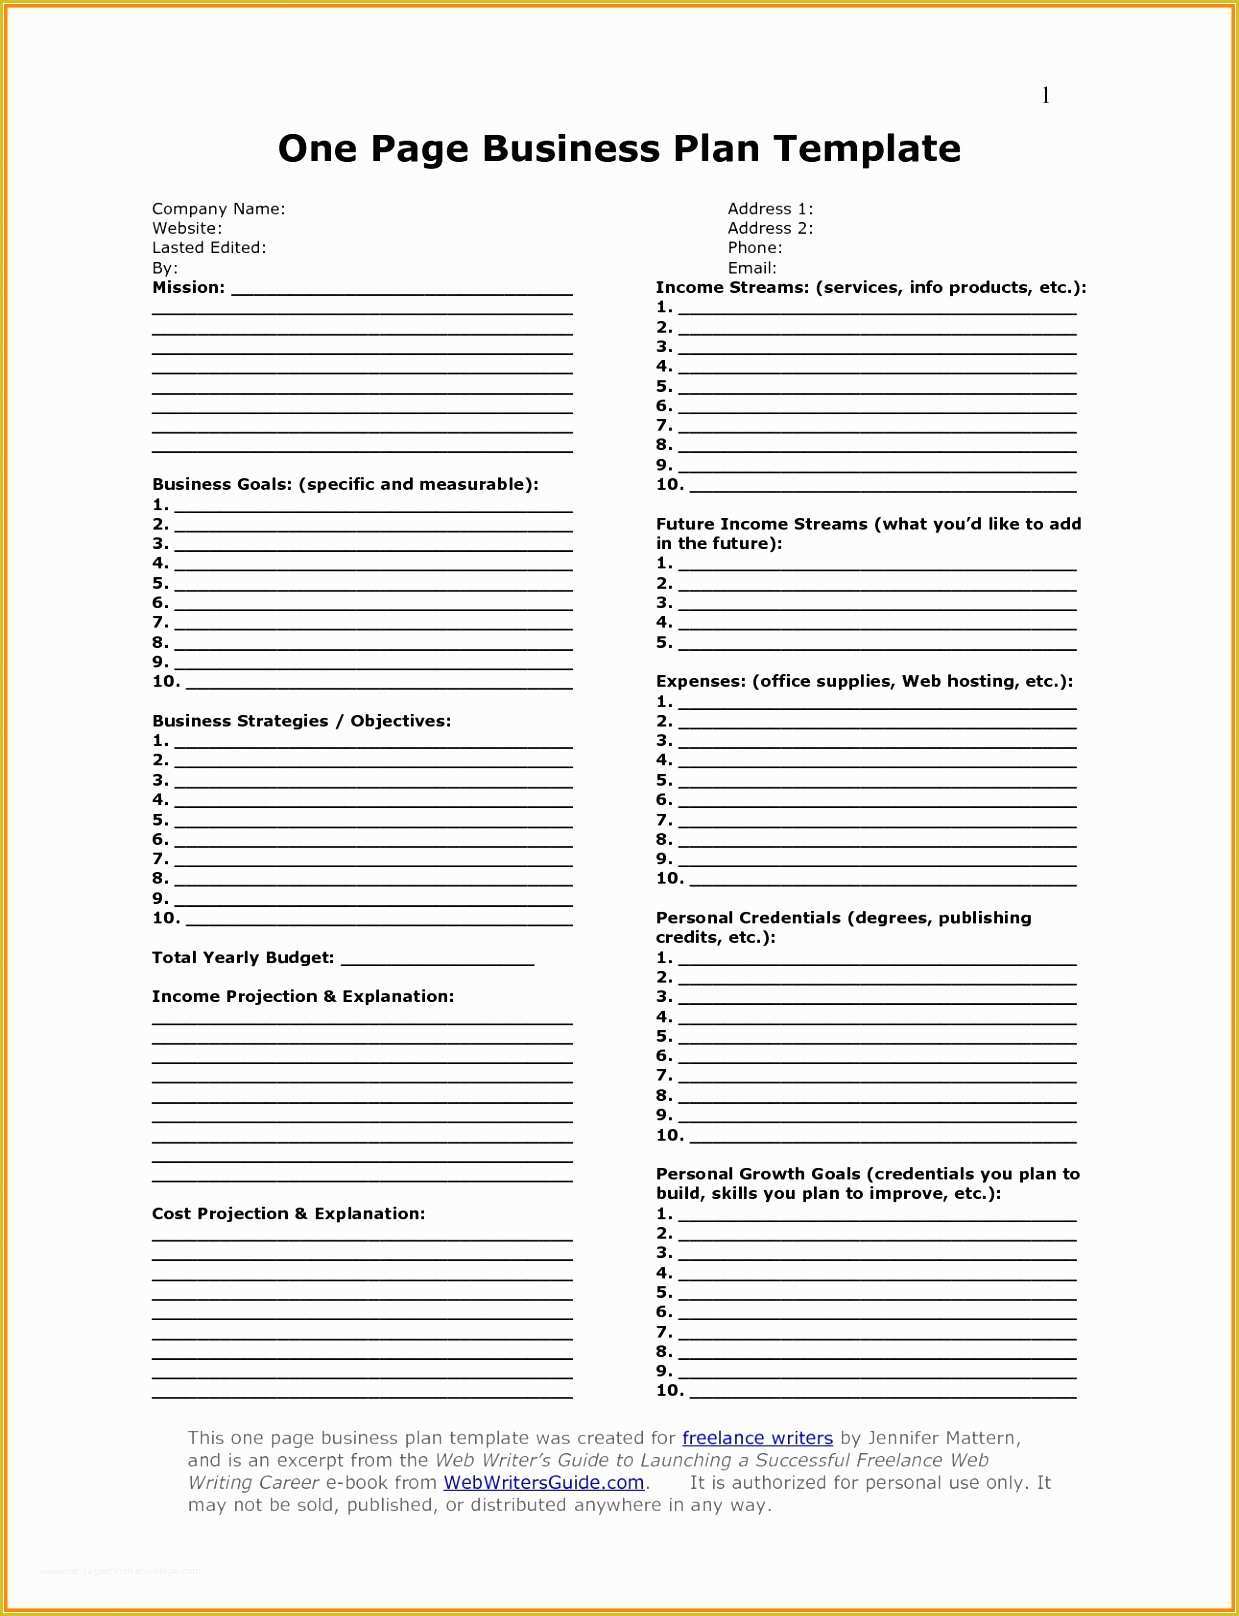 Best Free Business Plan Template Of 9 Free Business Plan Template for Small Business Uk Rtyio